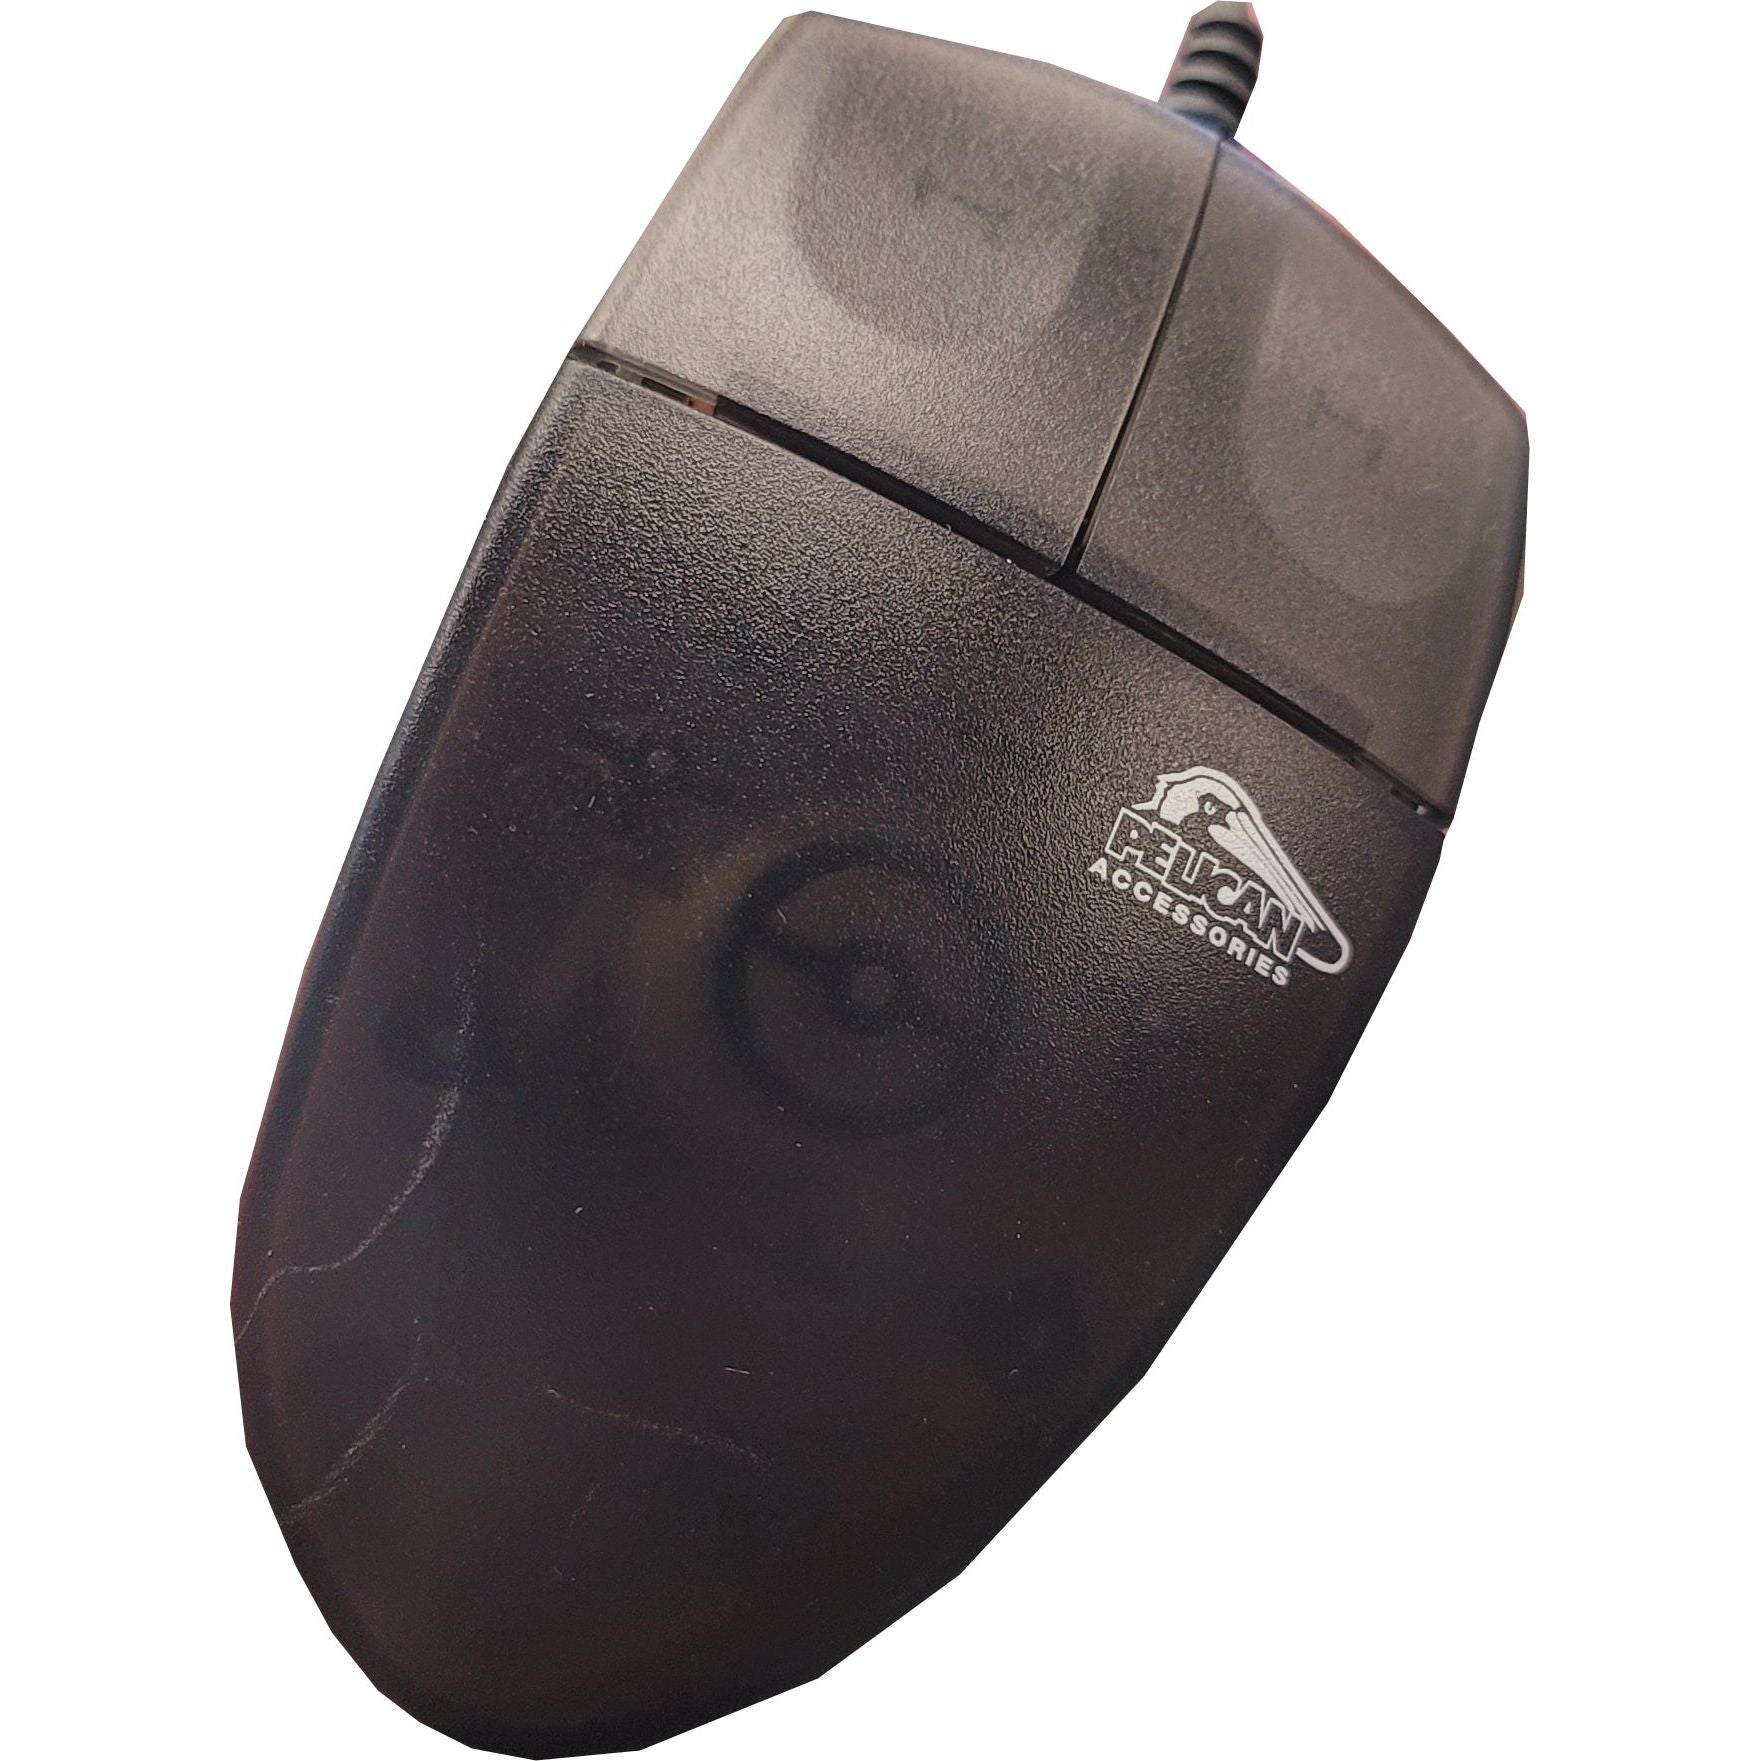 PlayStation Mouse by Pelican